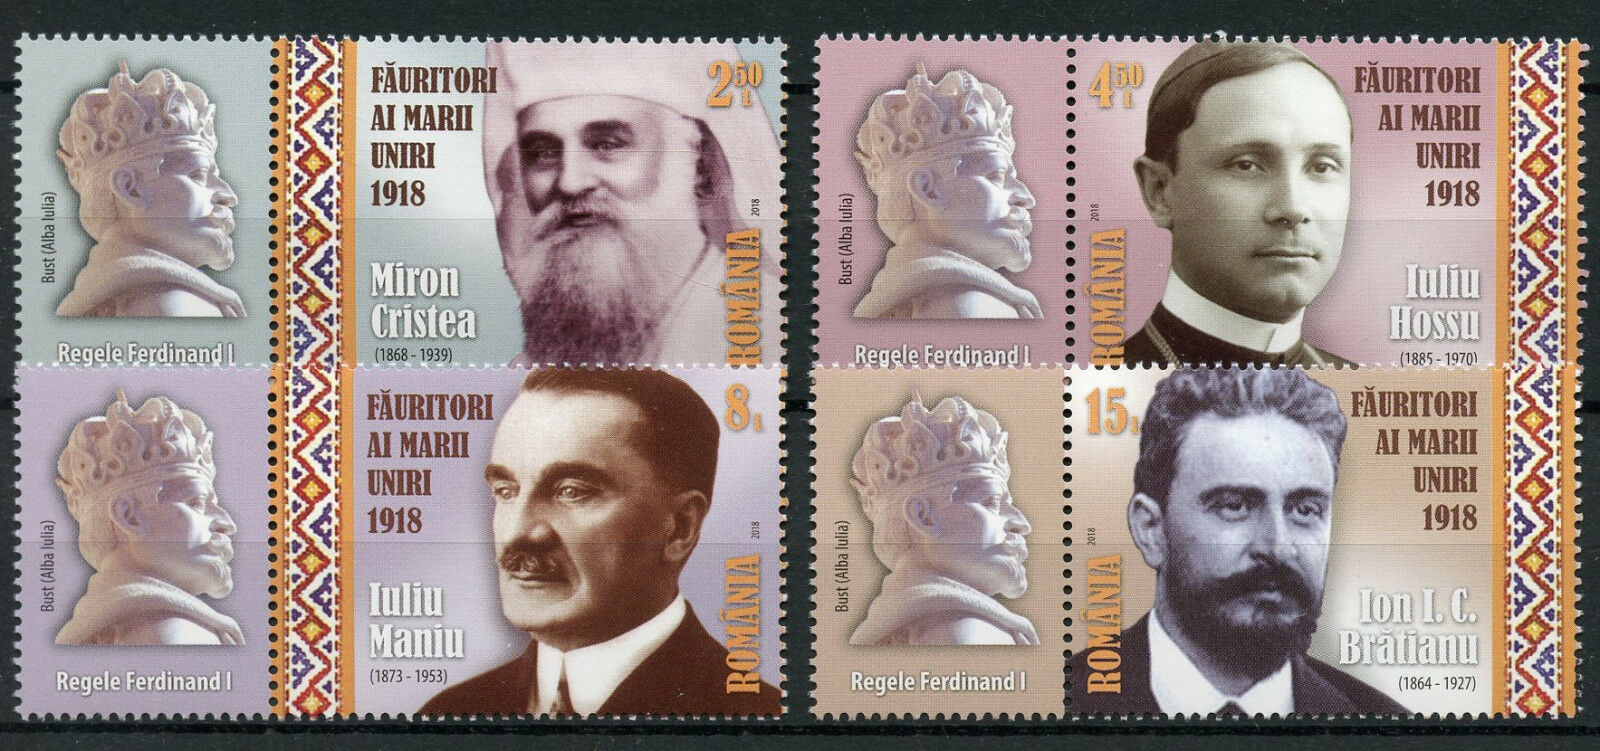 Romania 2018 MNH Founders Great Union 4v Set + Ferdinand I Label Royalty Stamps